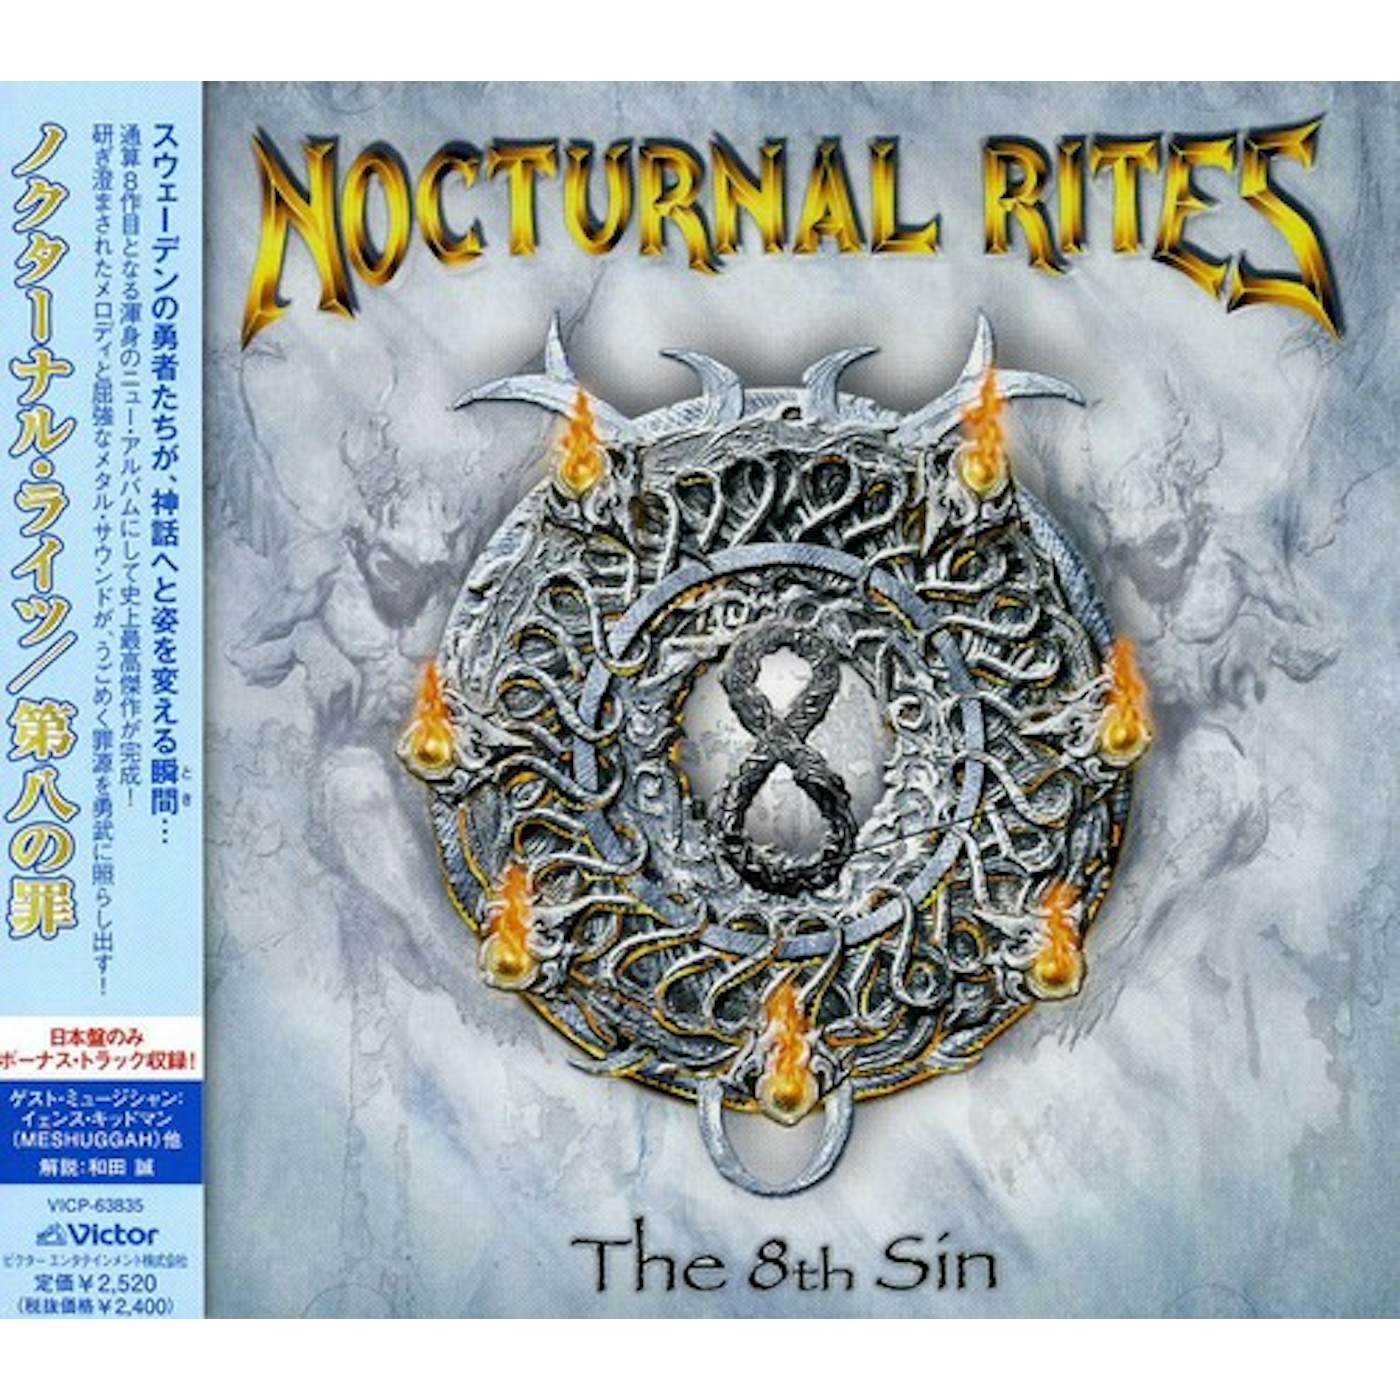 Nocturnal Rites 8TH SIN CD